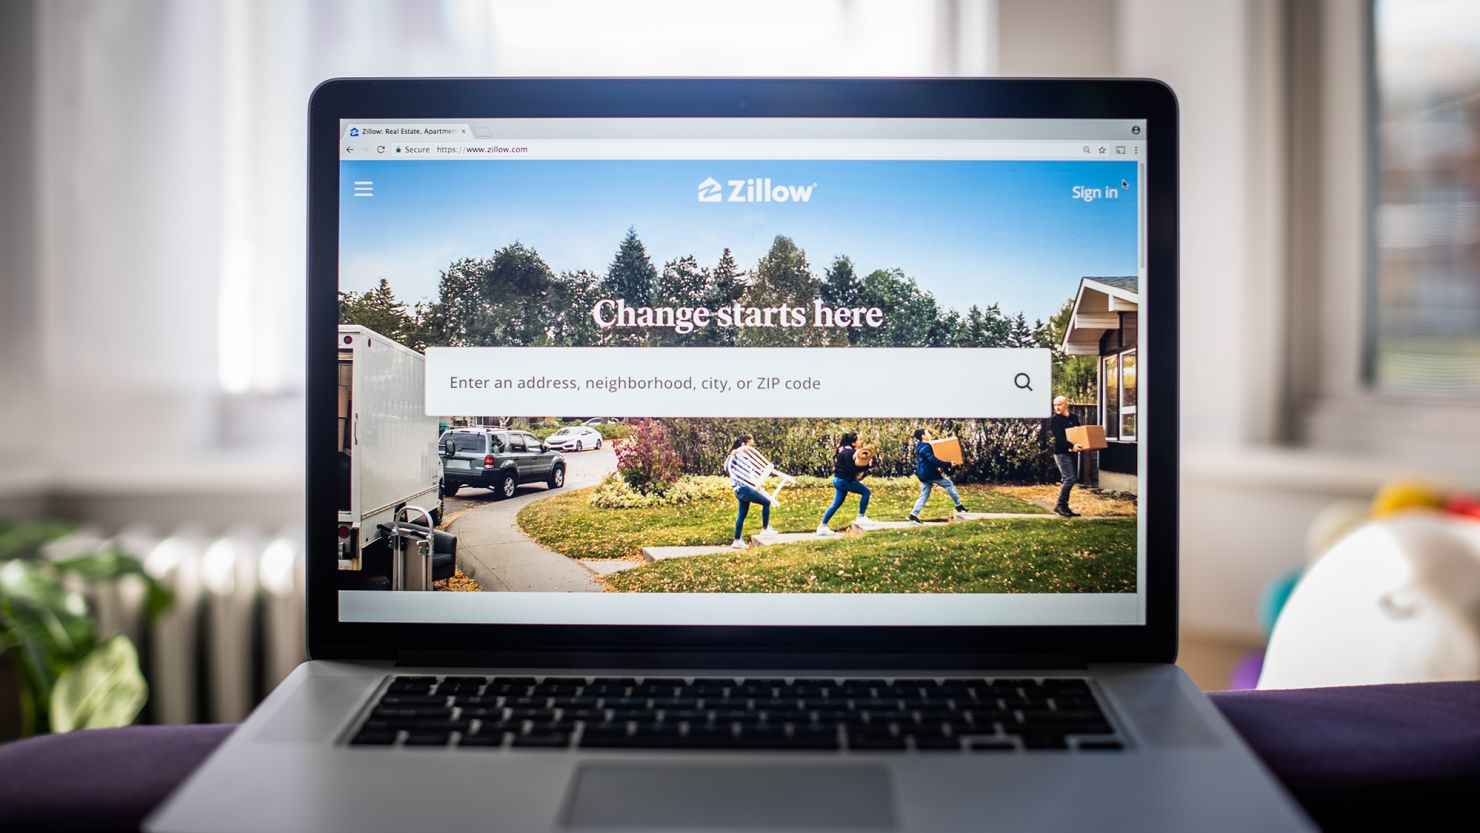 Shares of Zillow have fallen as investors worry that lower commission rates for agents could impact the platform.